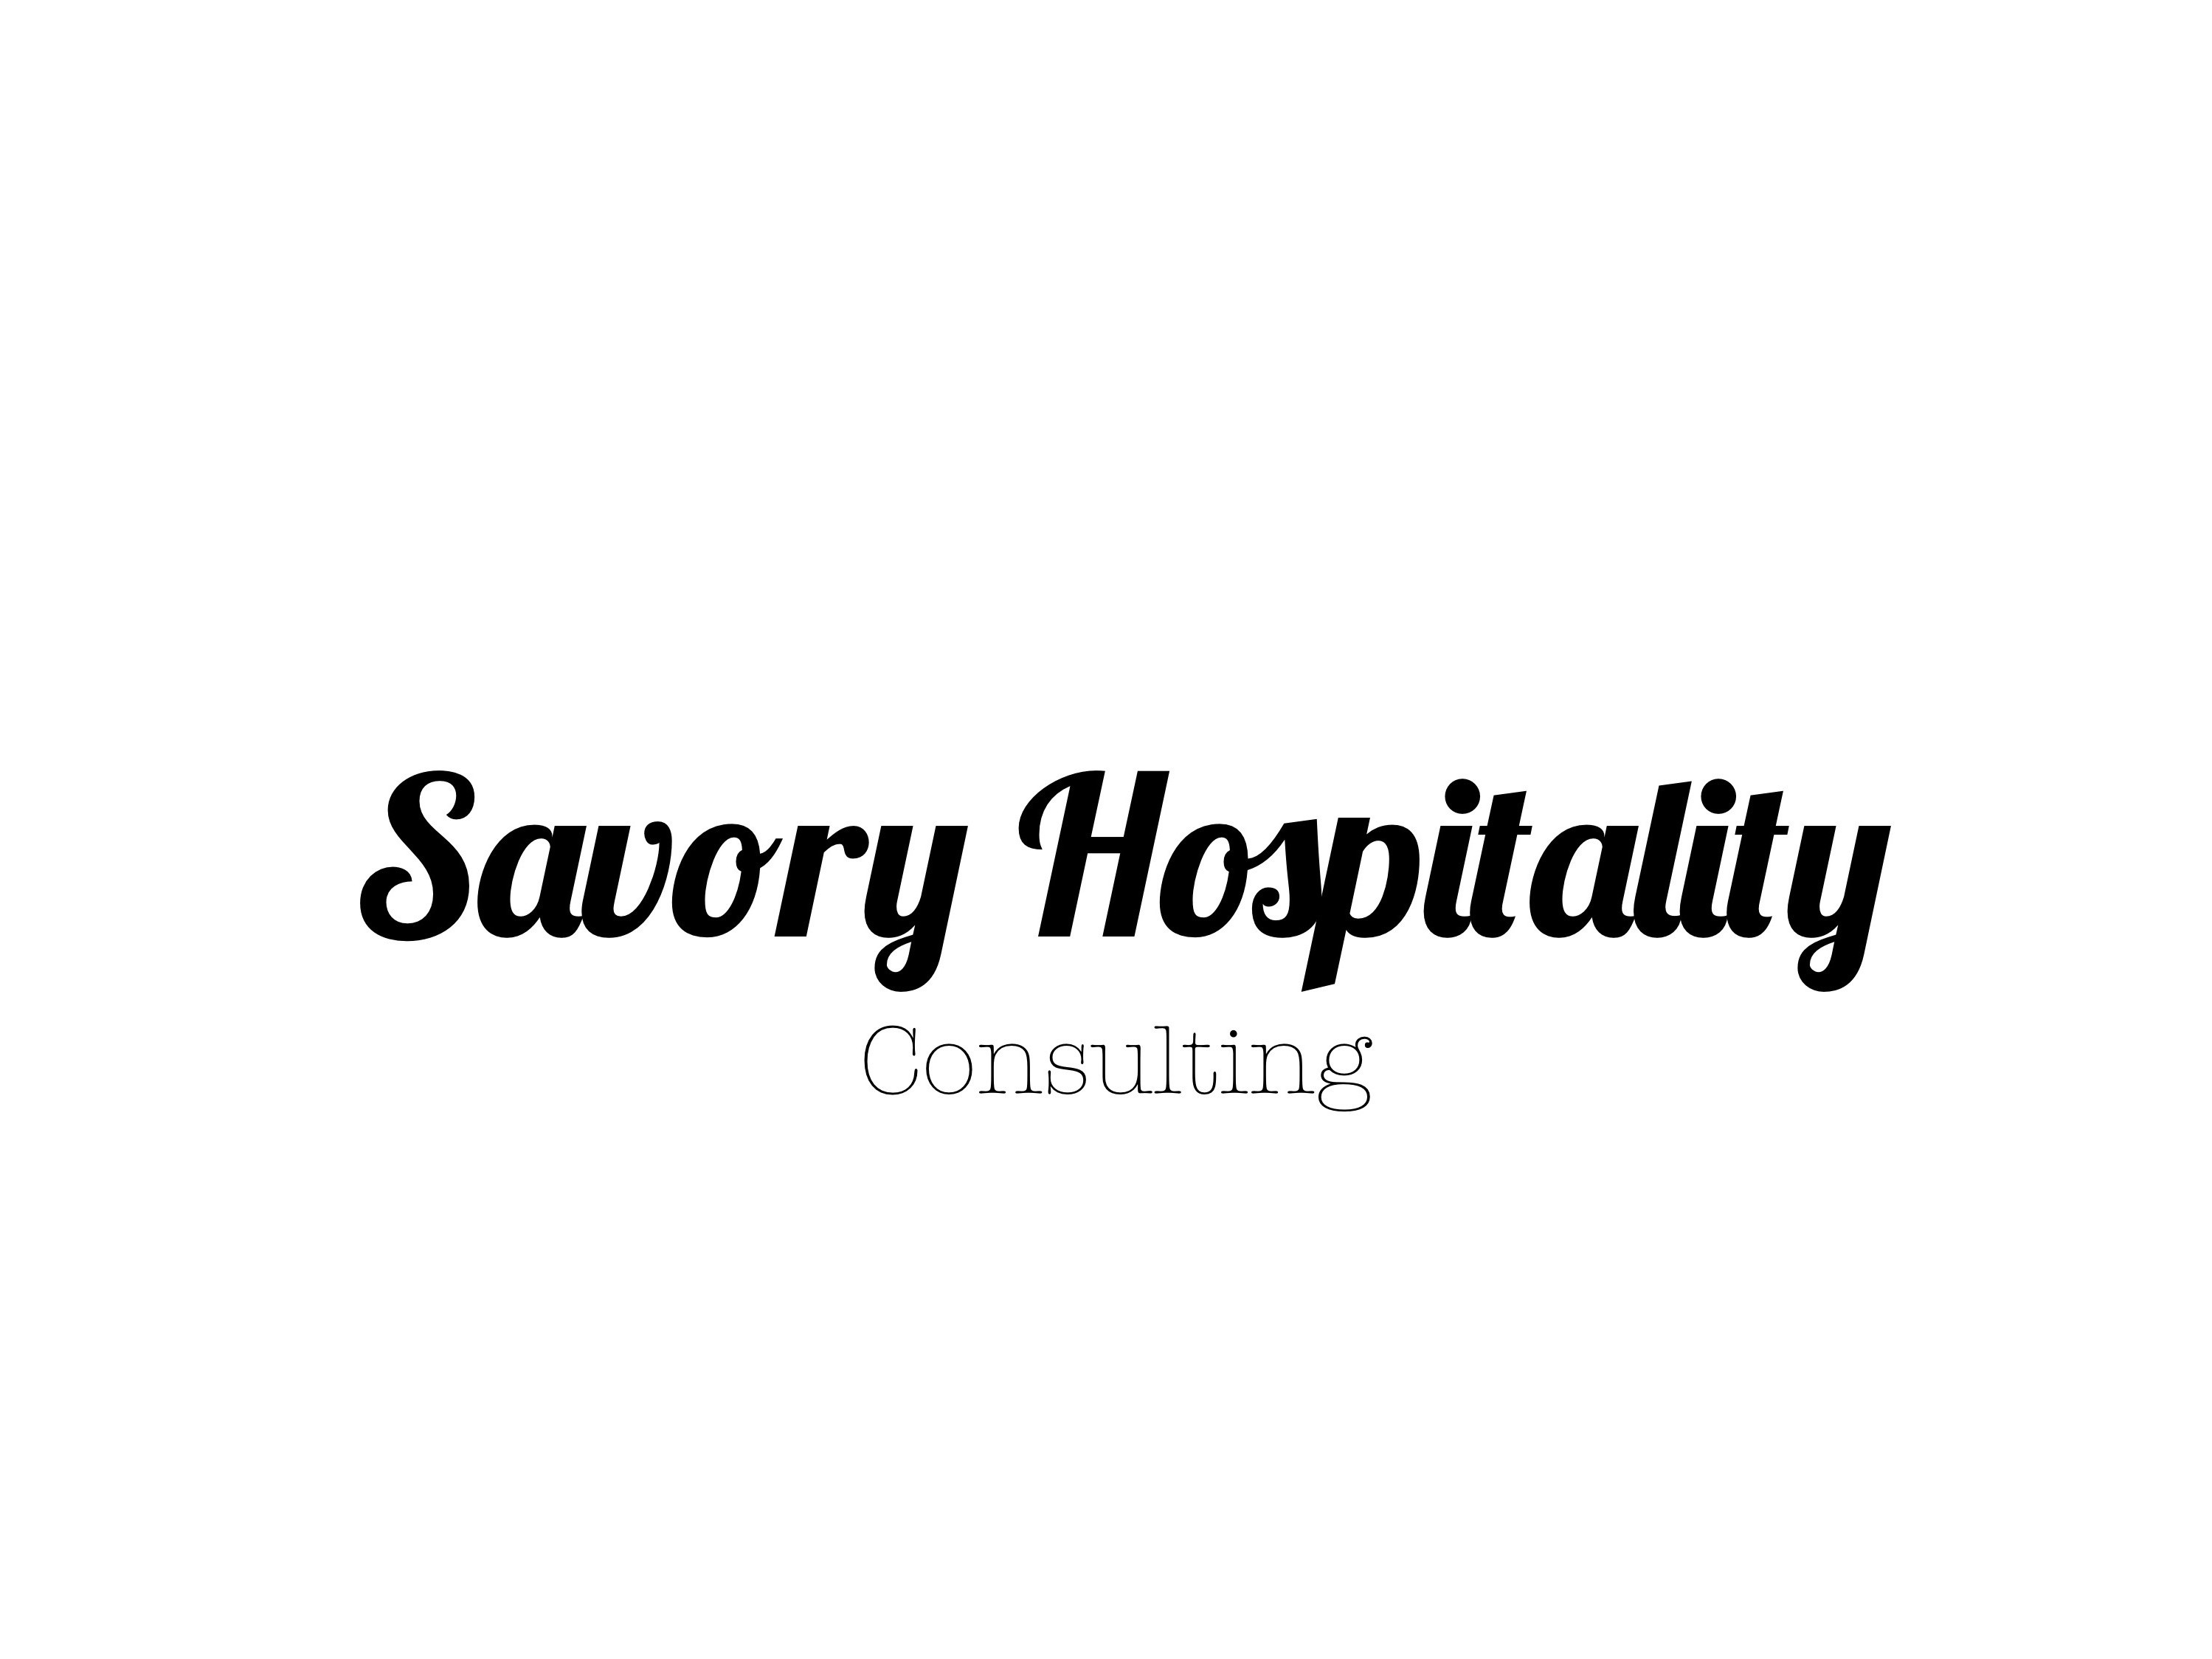 Savory Hospitality Consulting